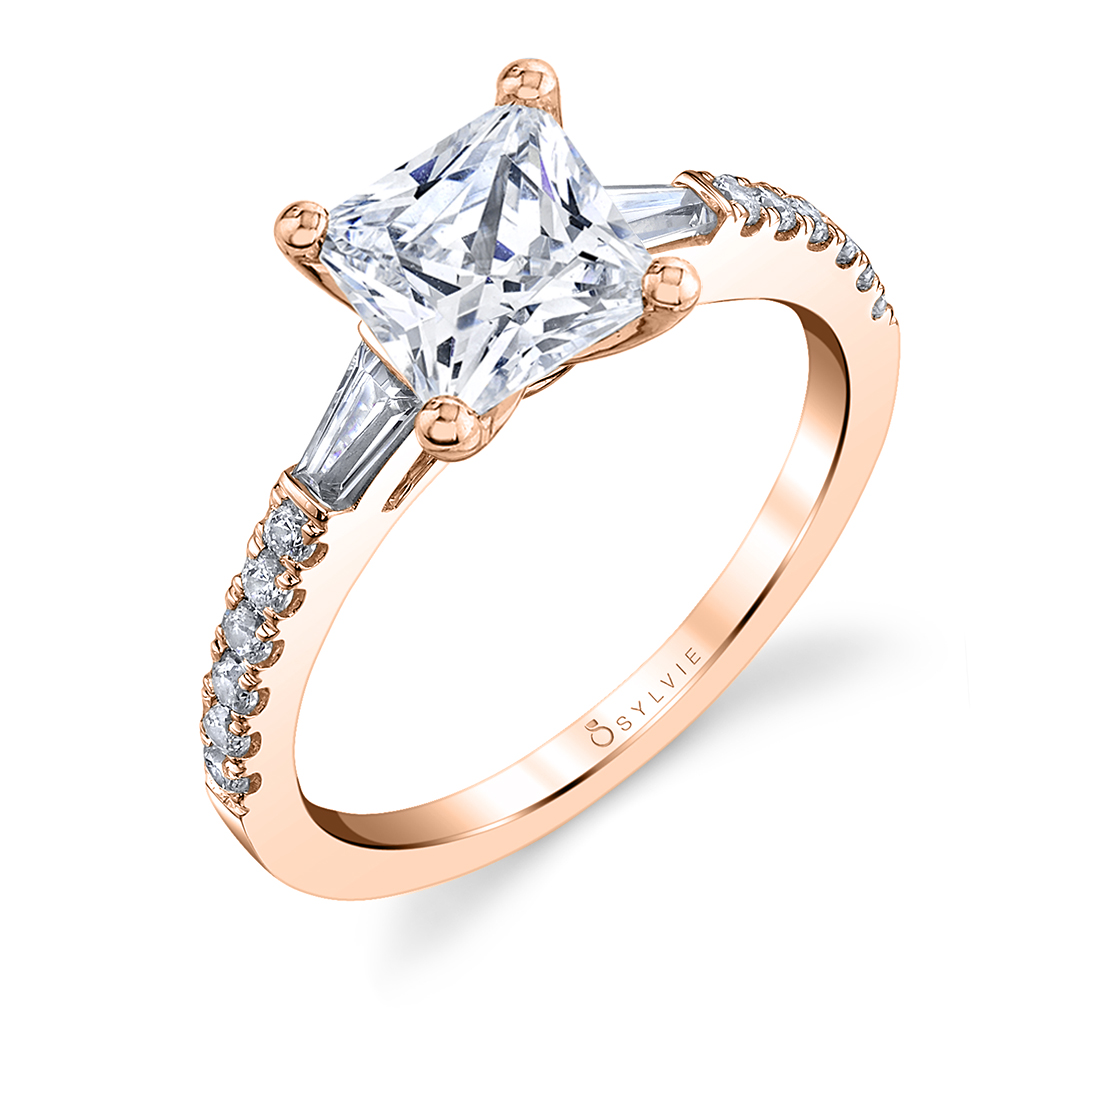 Princess cut engagement ring with baguettes